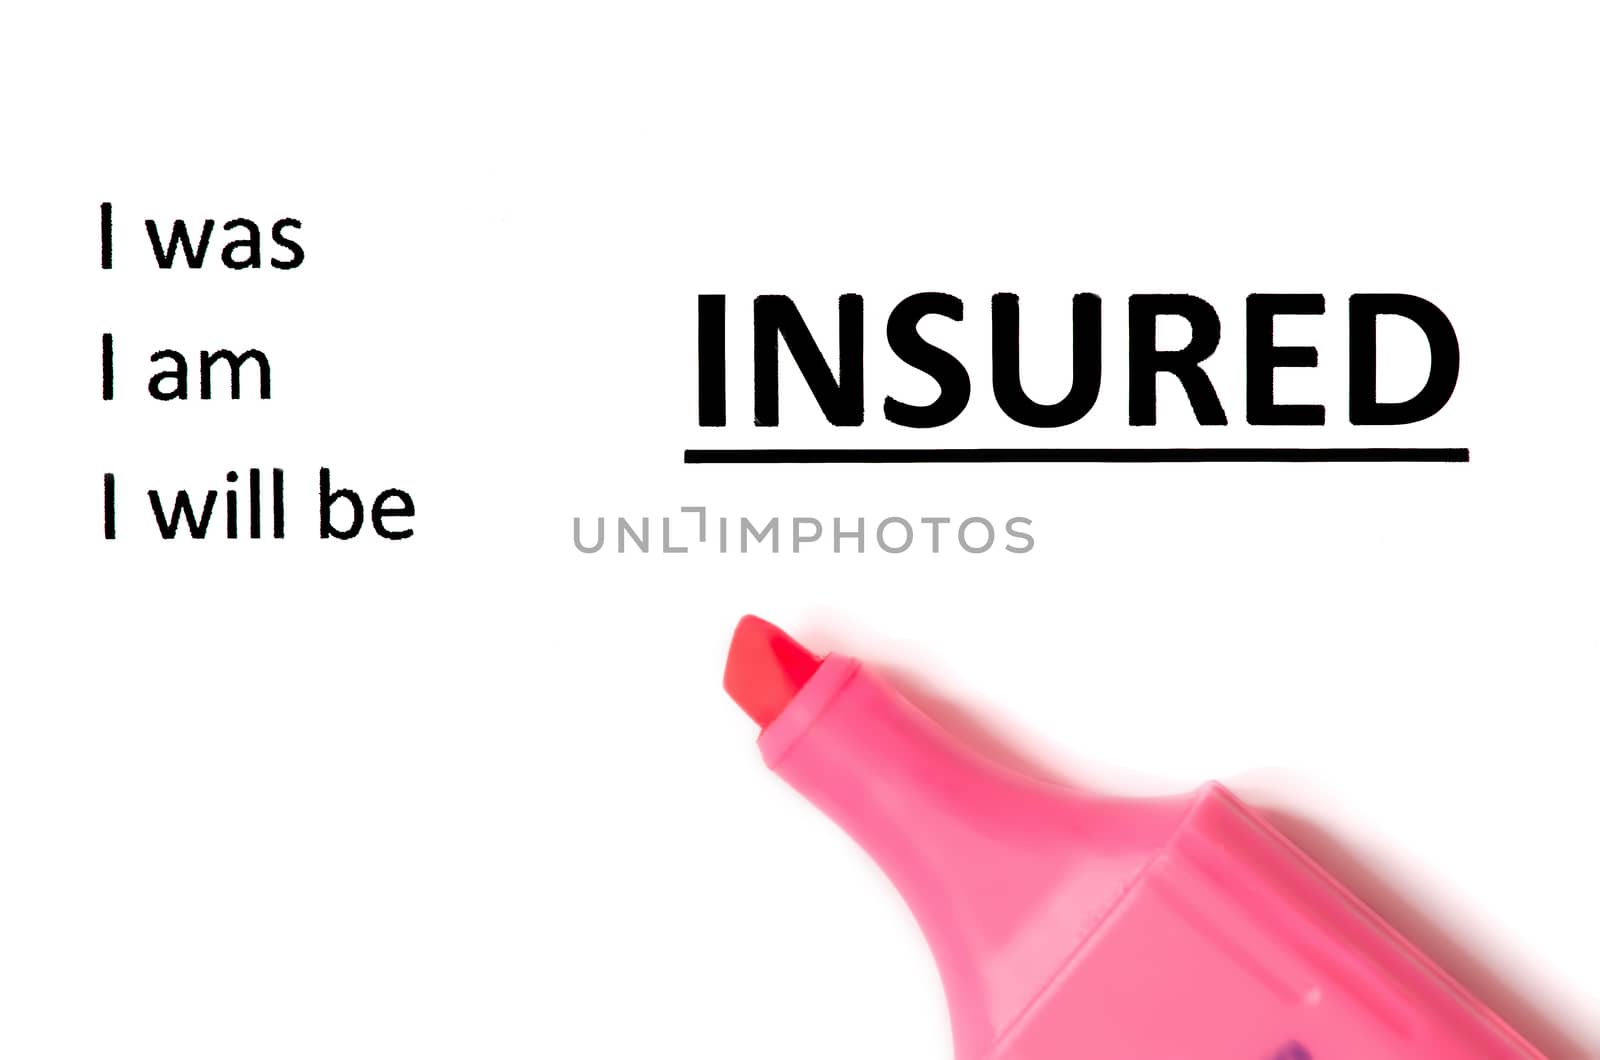 Insurance business concept and pink makrer isolated on white background.